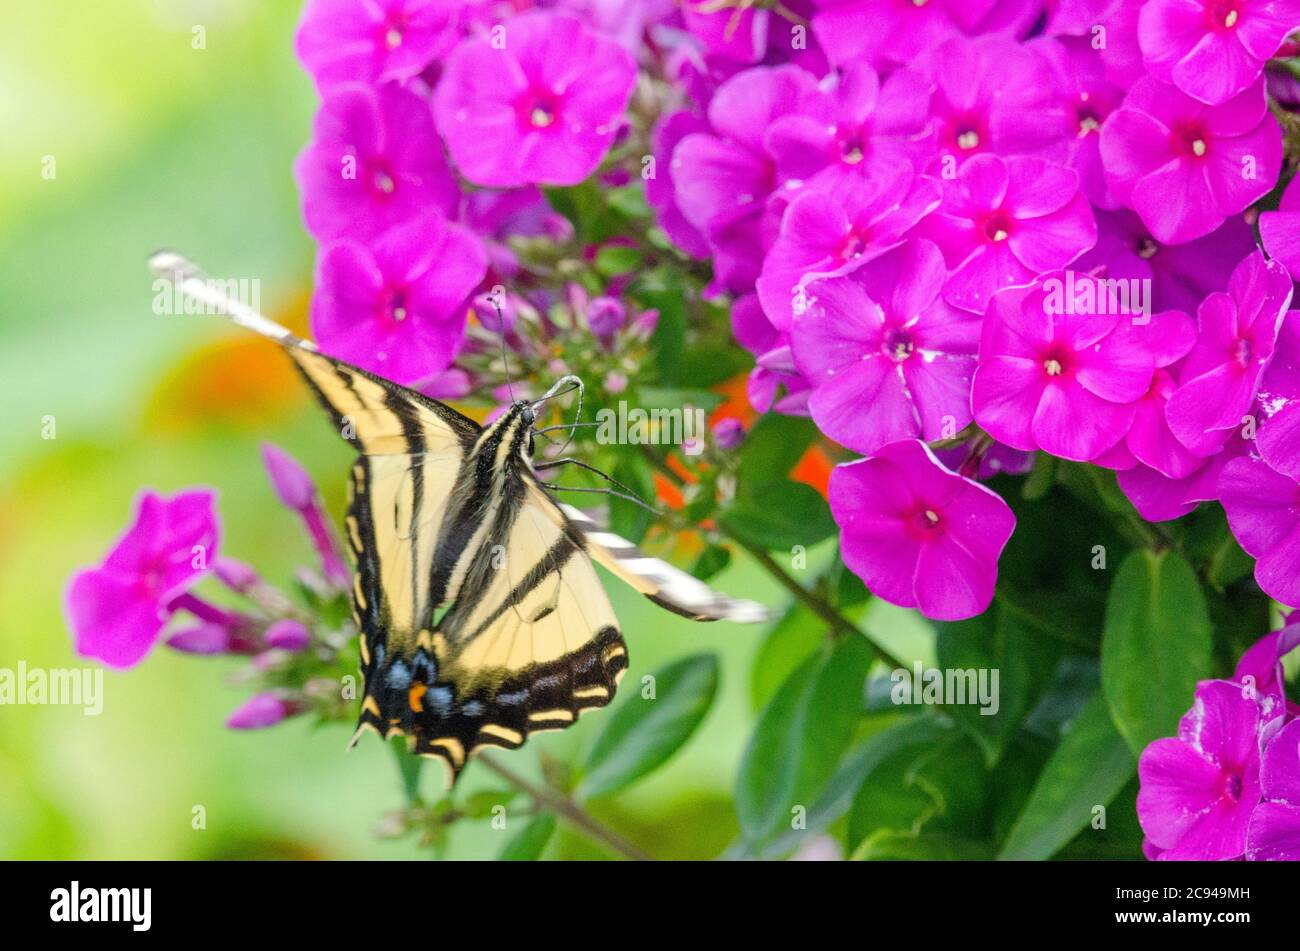 A Western Tiger Swallowtail butterfly looks for nectar among the flowers of a phlox plant in a community garden in Redmond, Washington. Stock Photo